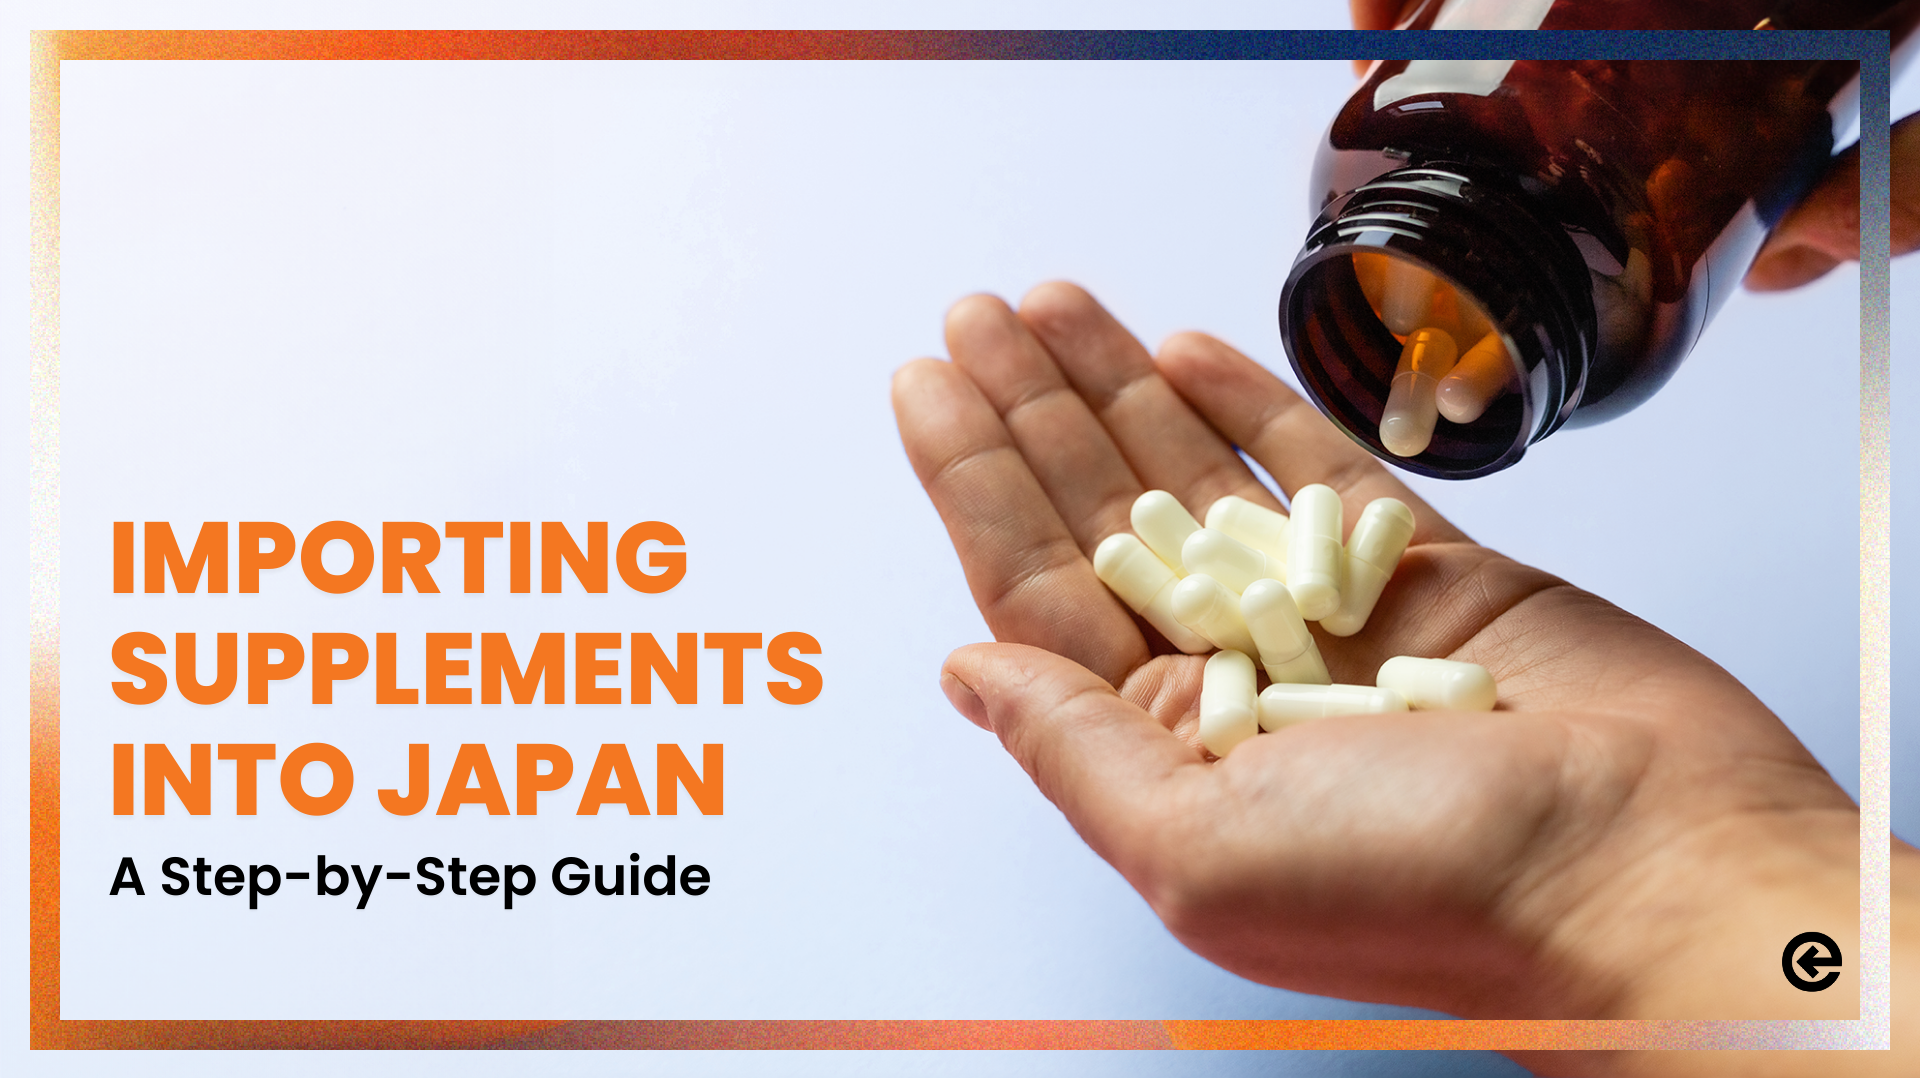 Importing Supplements into Japan: A Step-by-Step Guide